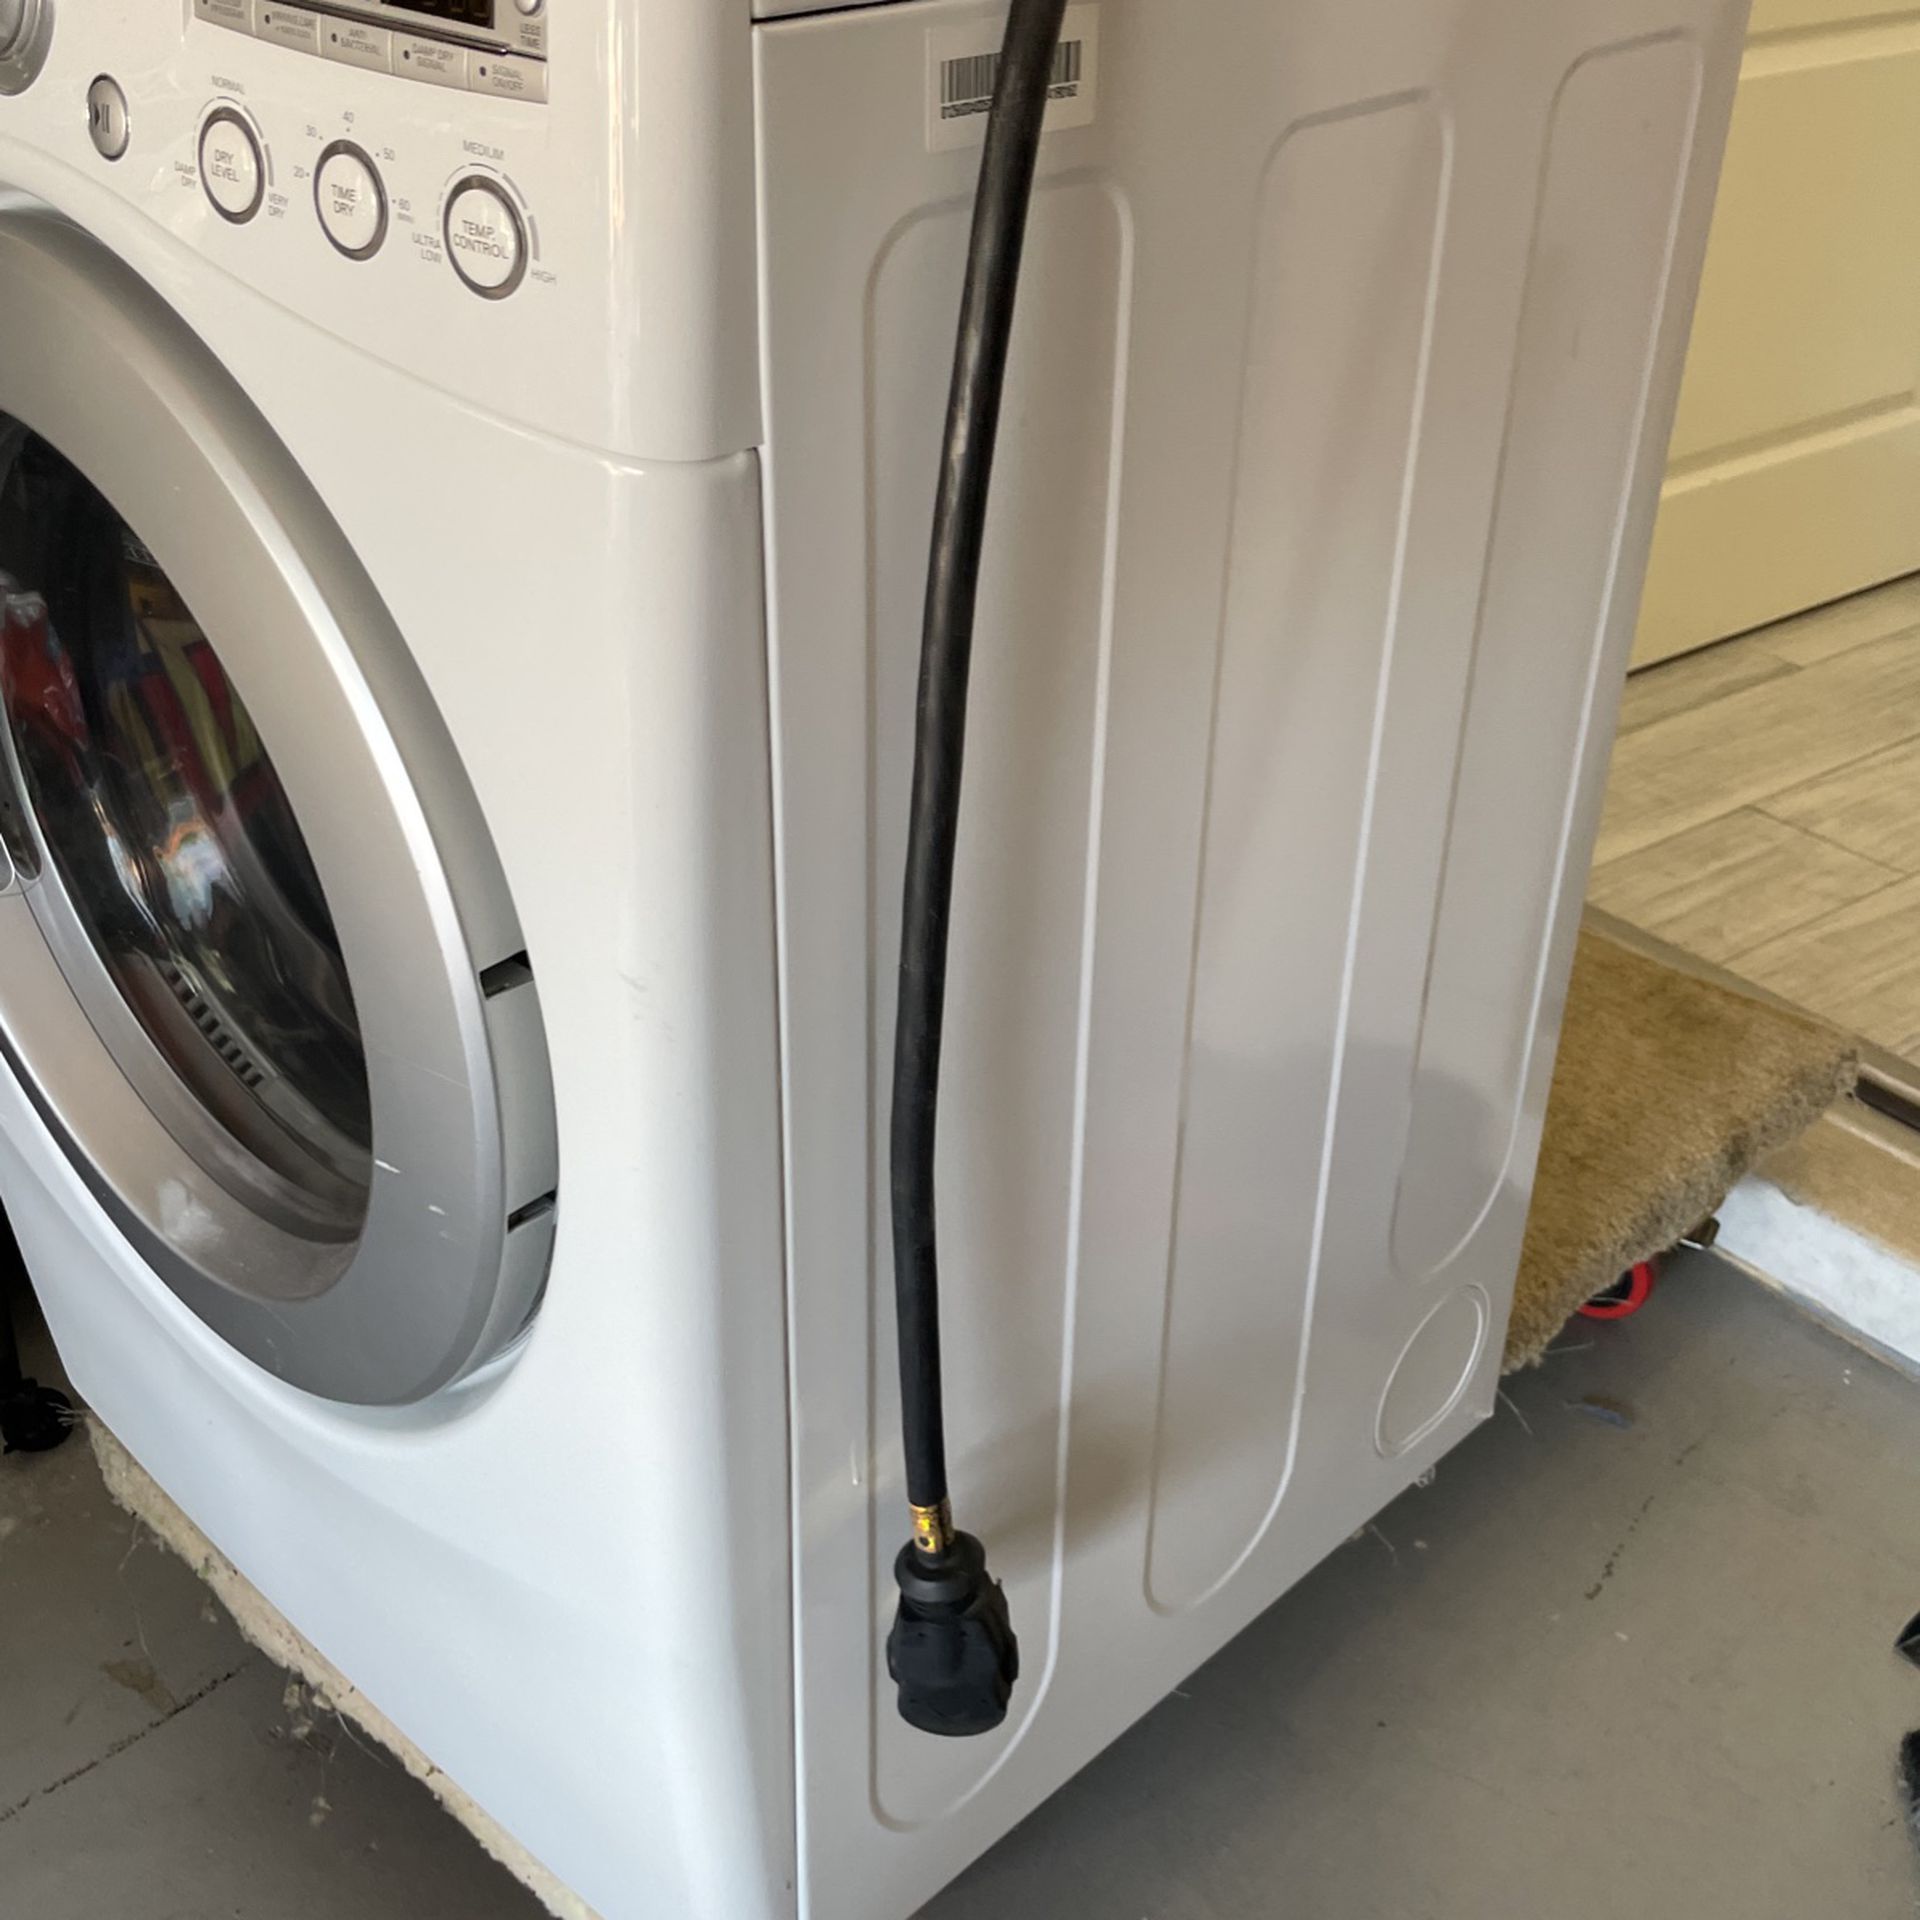 LG dryer And Washer